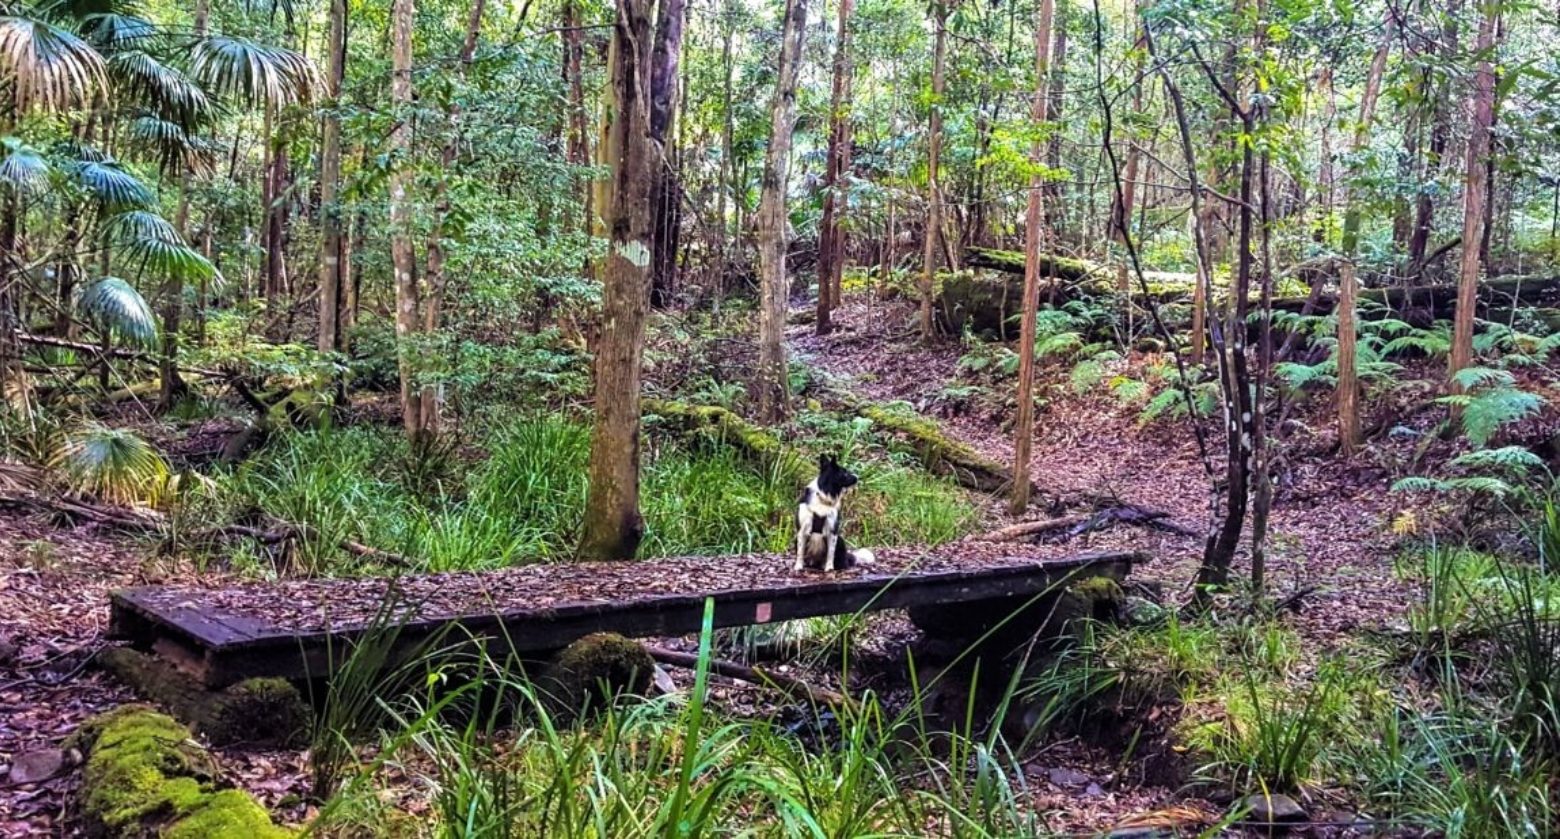 Dogs are allowed in state forests including Wang Wauk State Forest at Wotton.